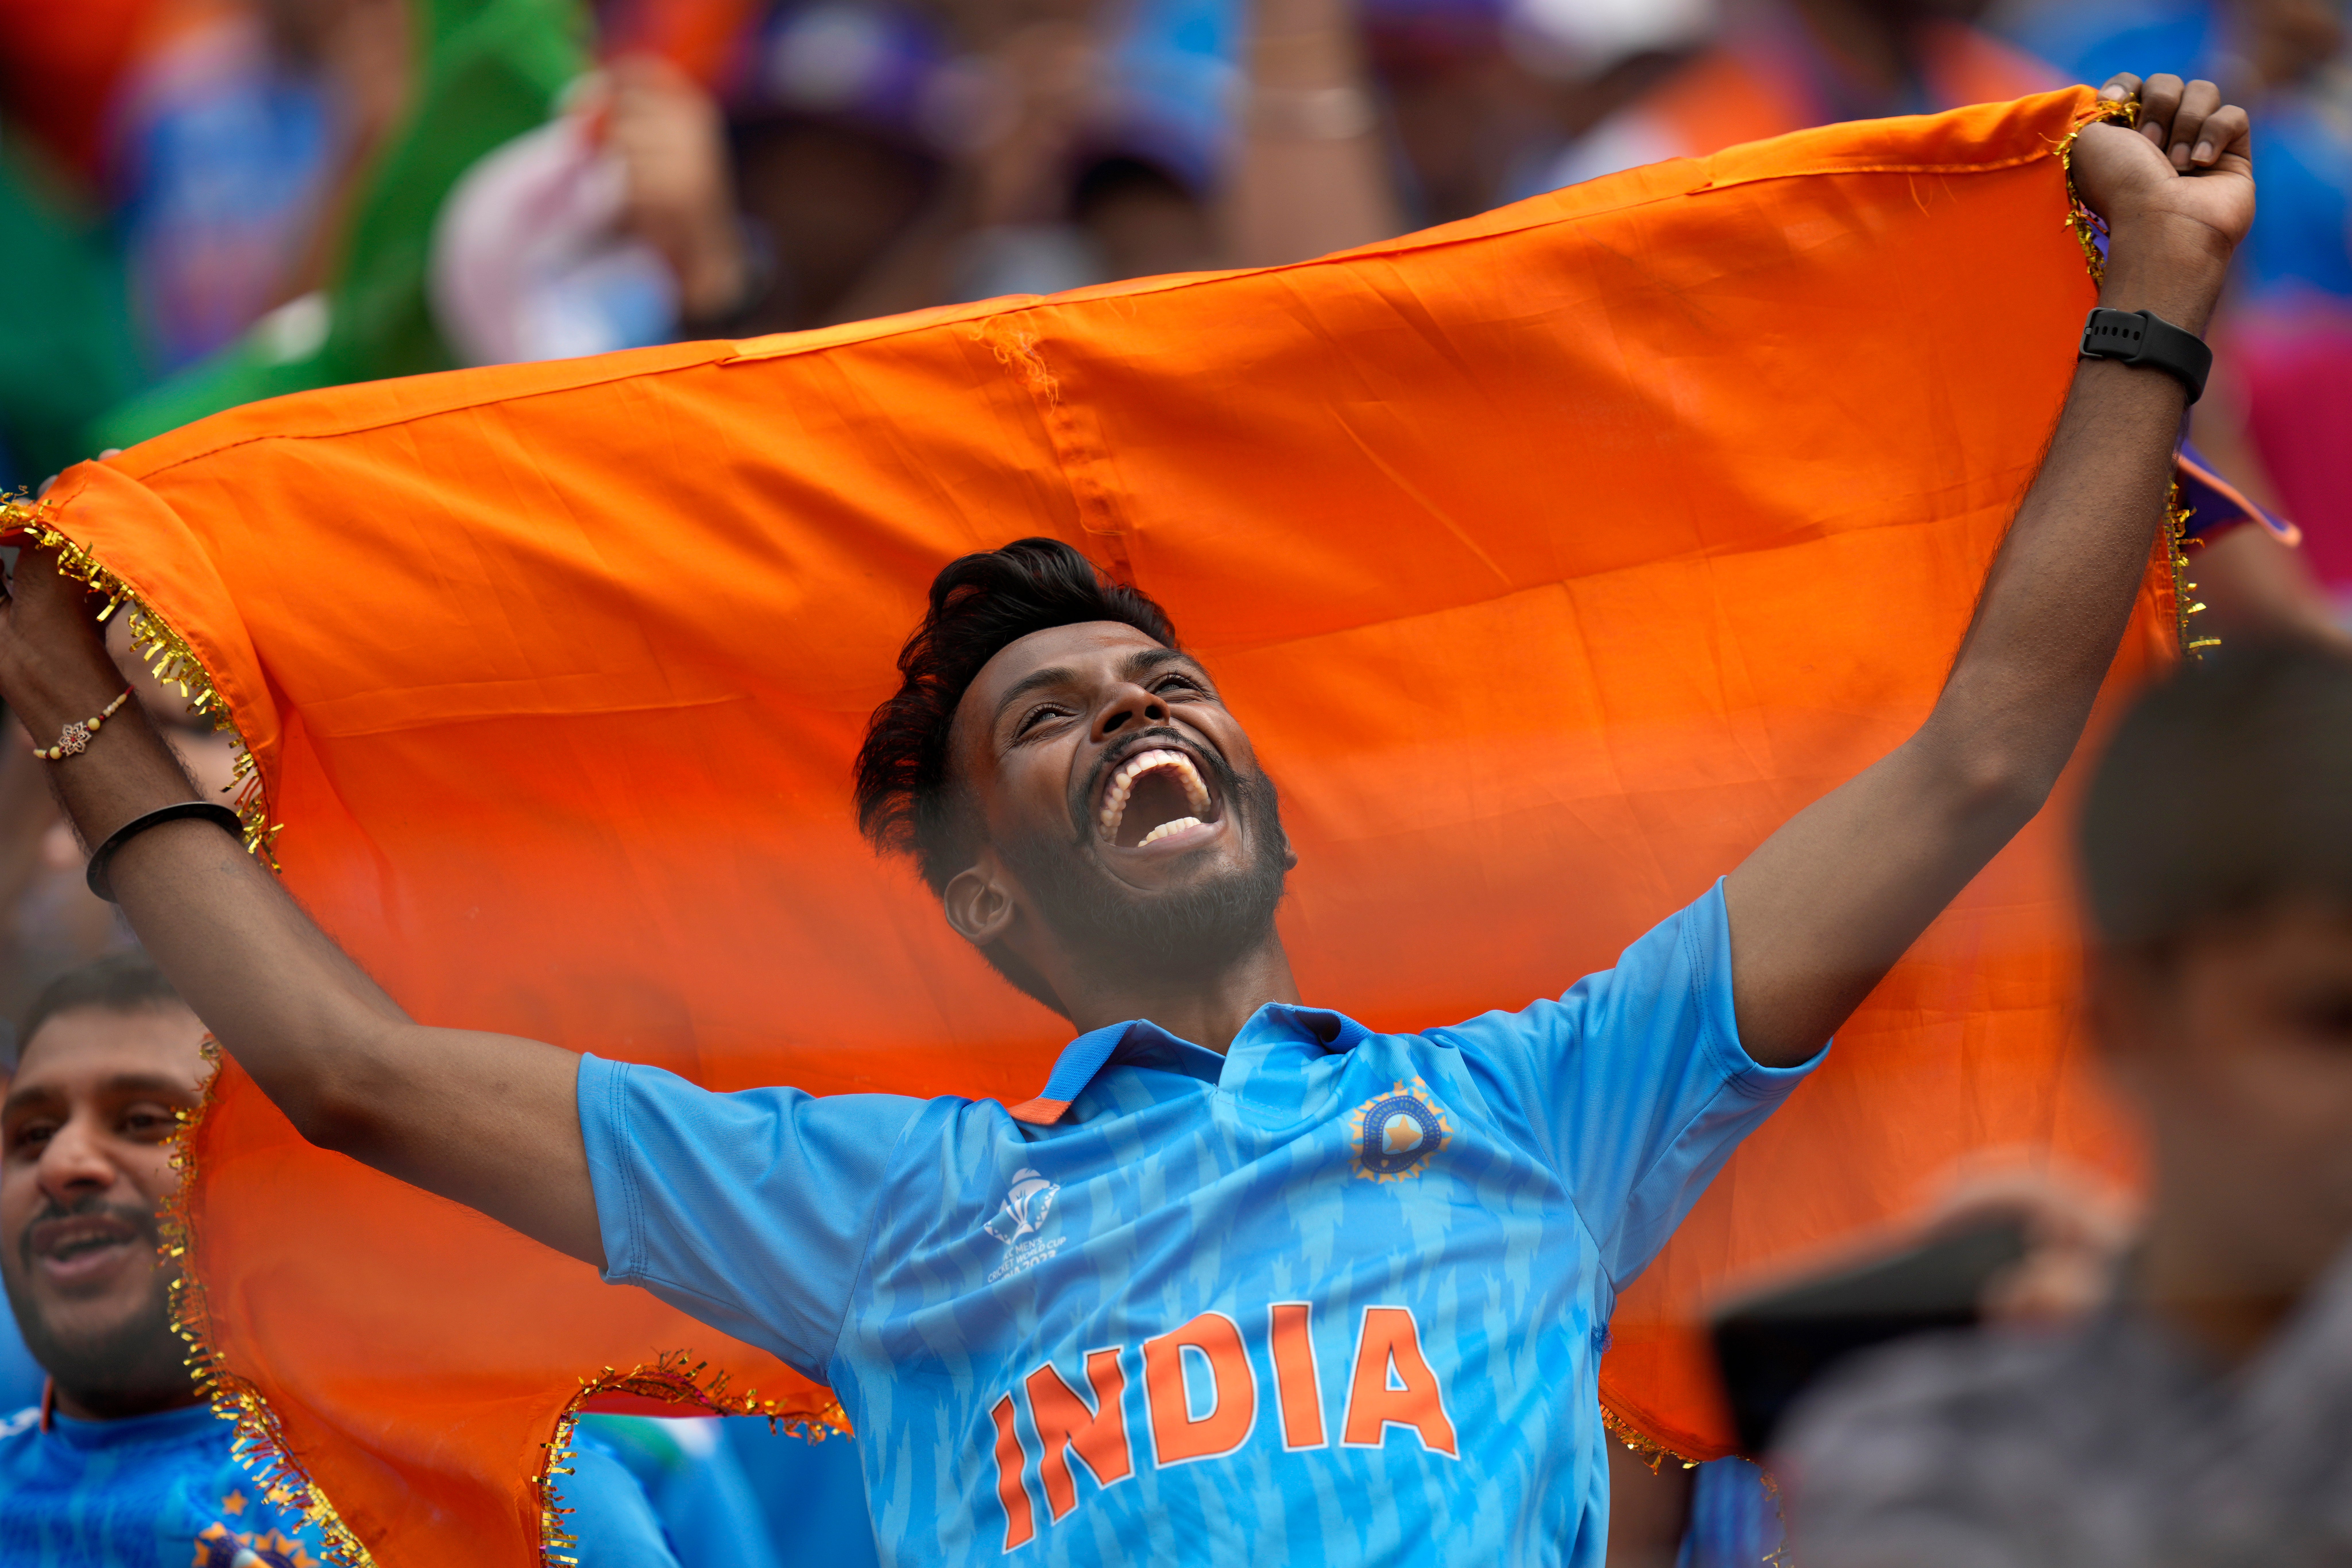 A fan cheers for the Indian cricket team before the start of ICC Men's Cricket World Cup match between India and Pakistan